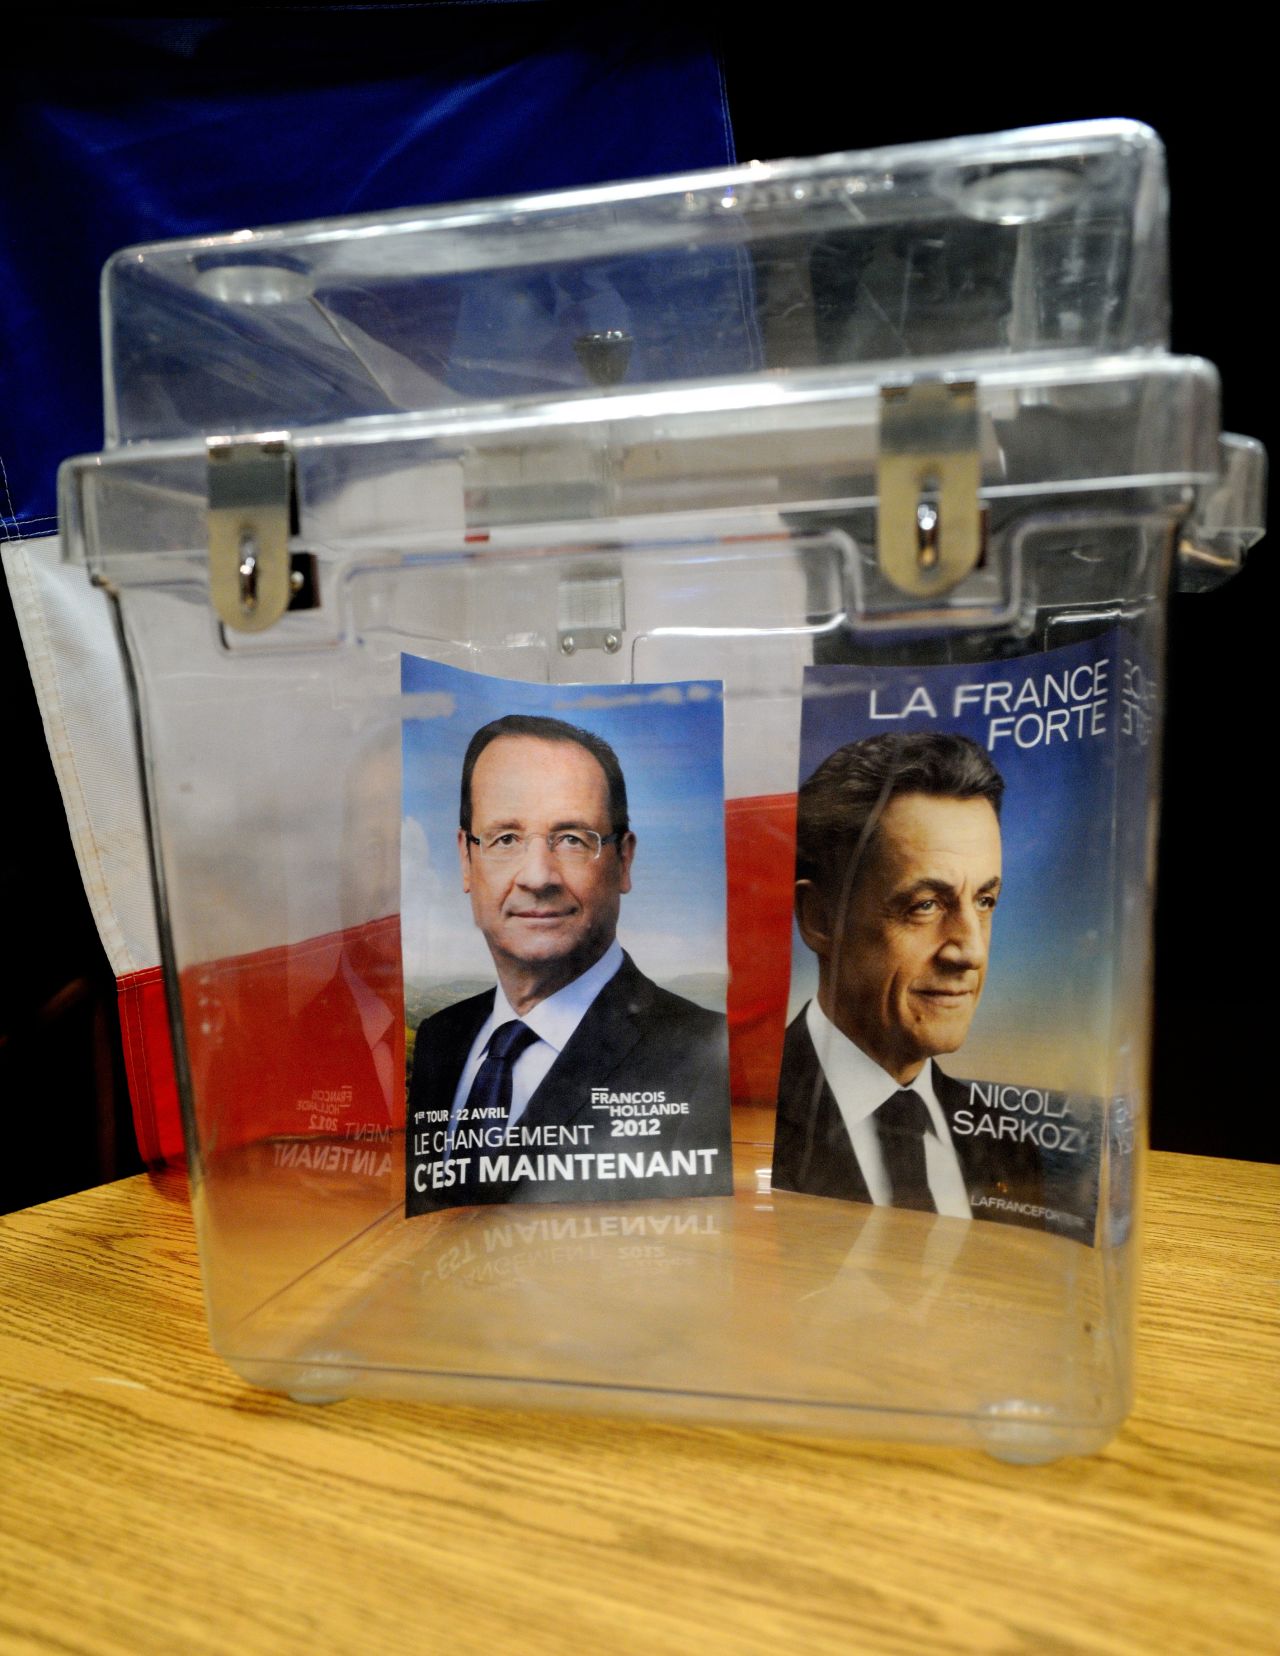 In <strong>France</strong>, Francois Hollande defeated President Nicolas Sarkozy, signaling a <a href="http://www.cnn.com/2012/05/06/world/europe/france-election/index.html">shift to the left</a> as the country and Europe fight to dig out of a weak economy. Hollande became the nation's first left-wing president since Francois Mitterrand in 1995. Sarkozy joined half a dozen leaders who were swept from office during the eurozone crisis.